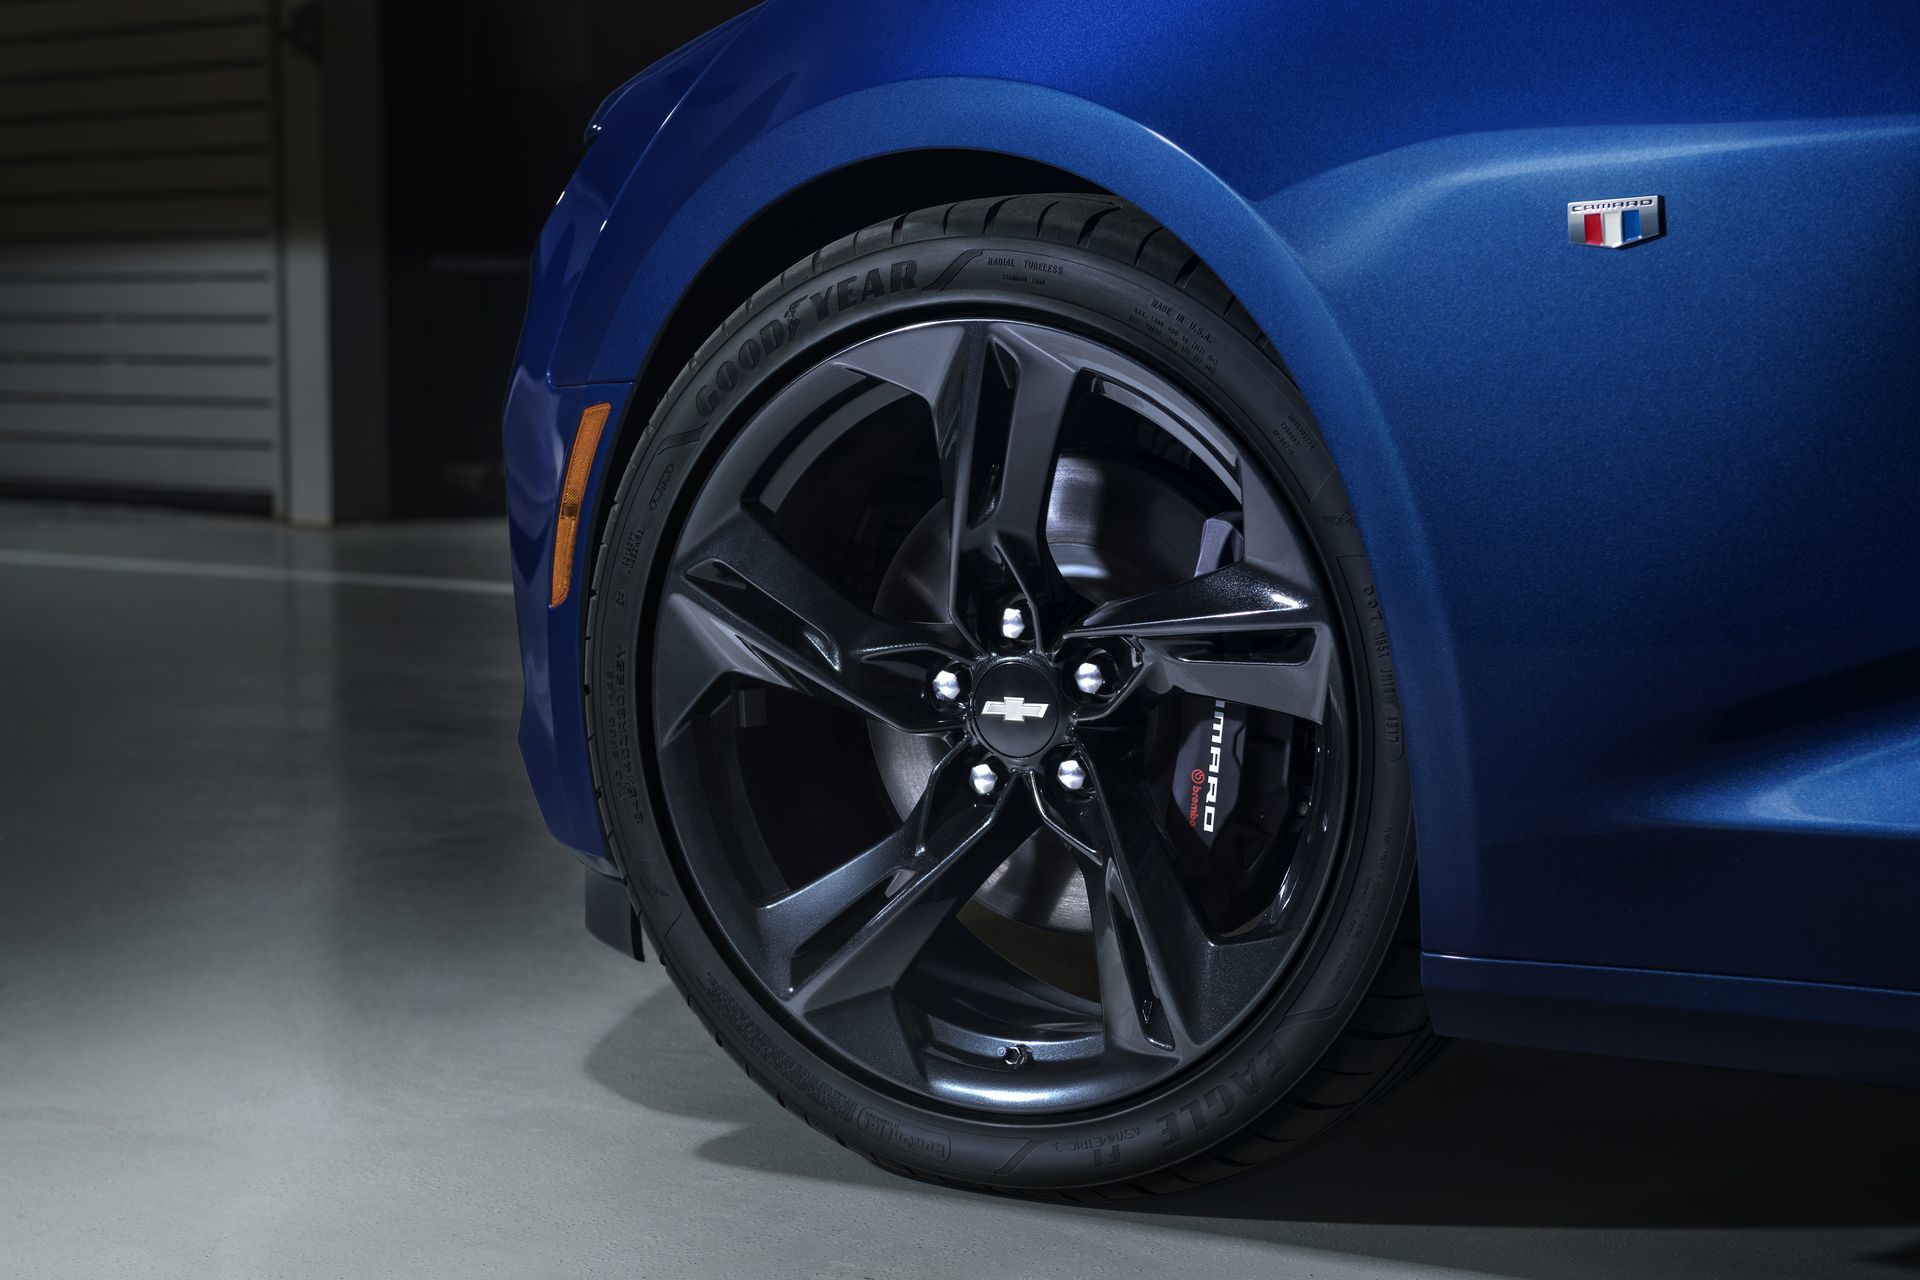 2019 Camaro Ss Offers New, Available 20 Inch Wheel Designs.